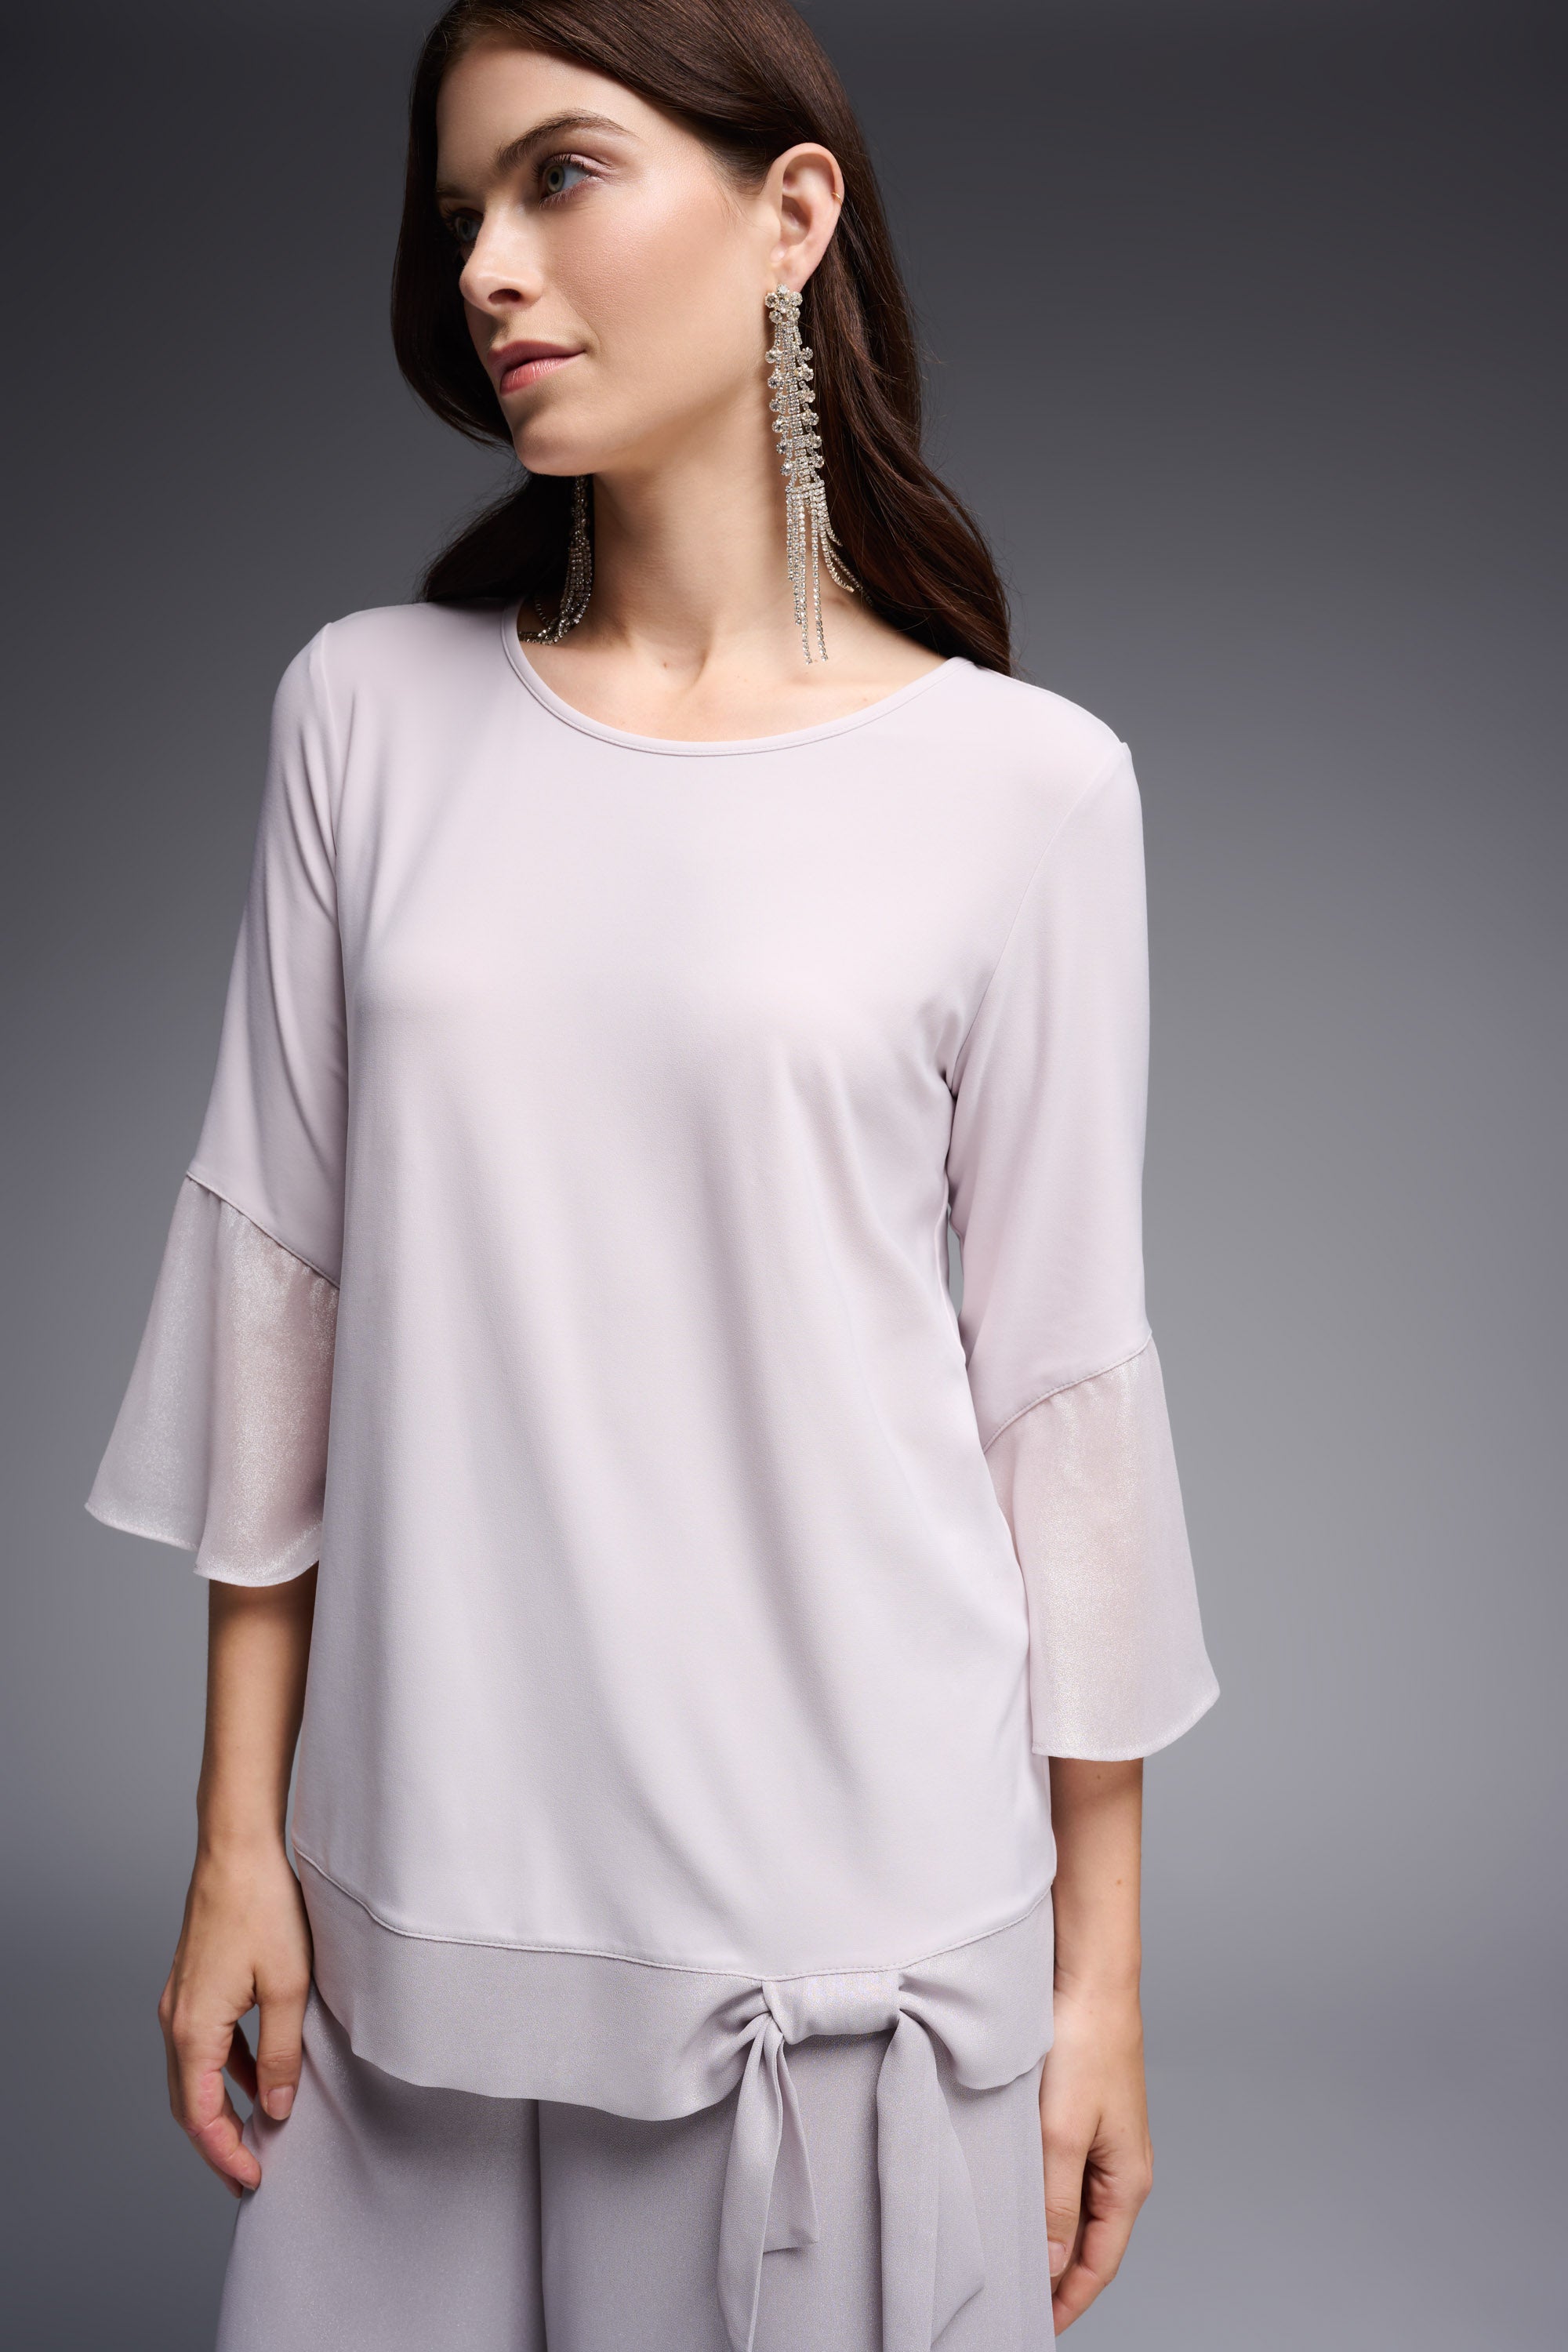 Chiffon Hem Top in Mother of Pearl 231739 - After Hours Boutique